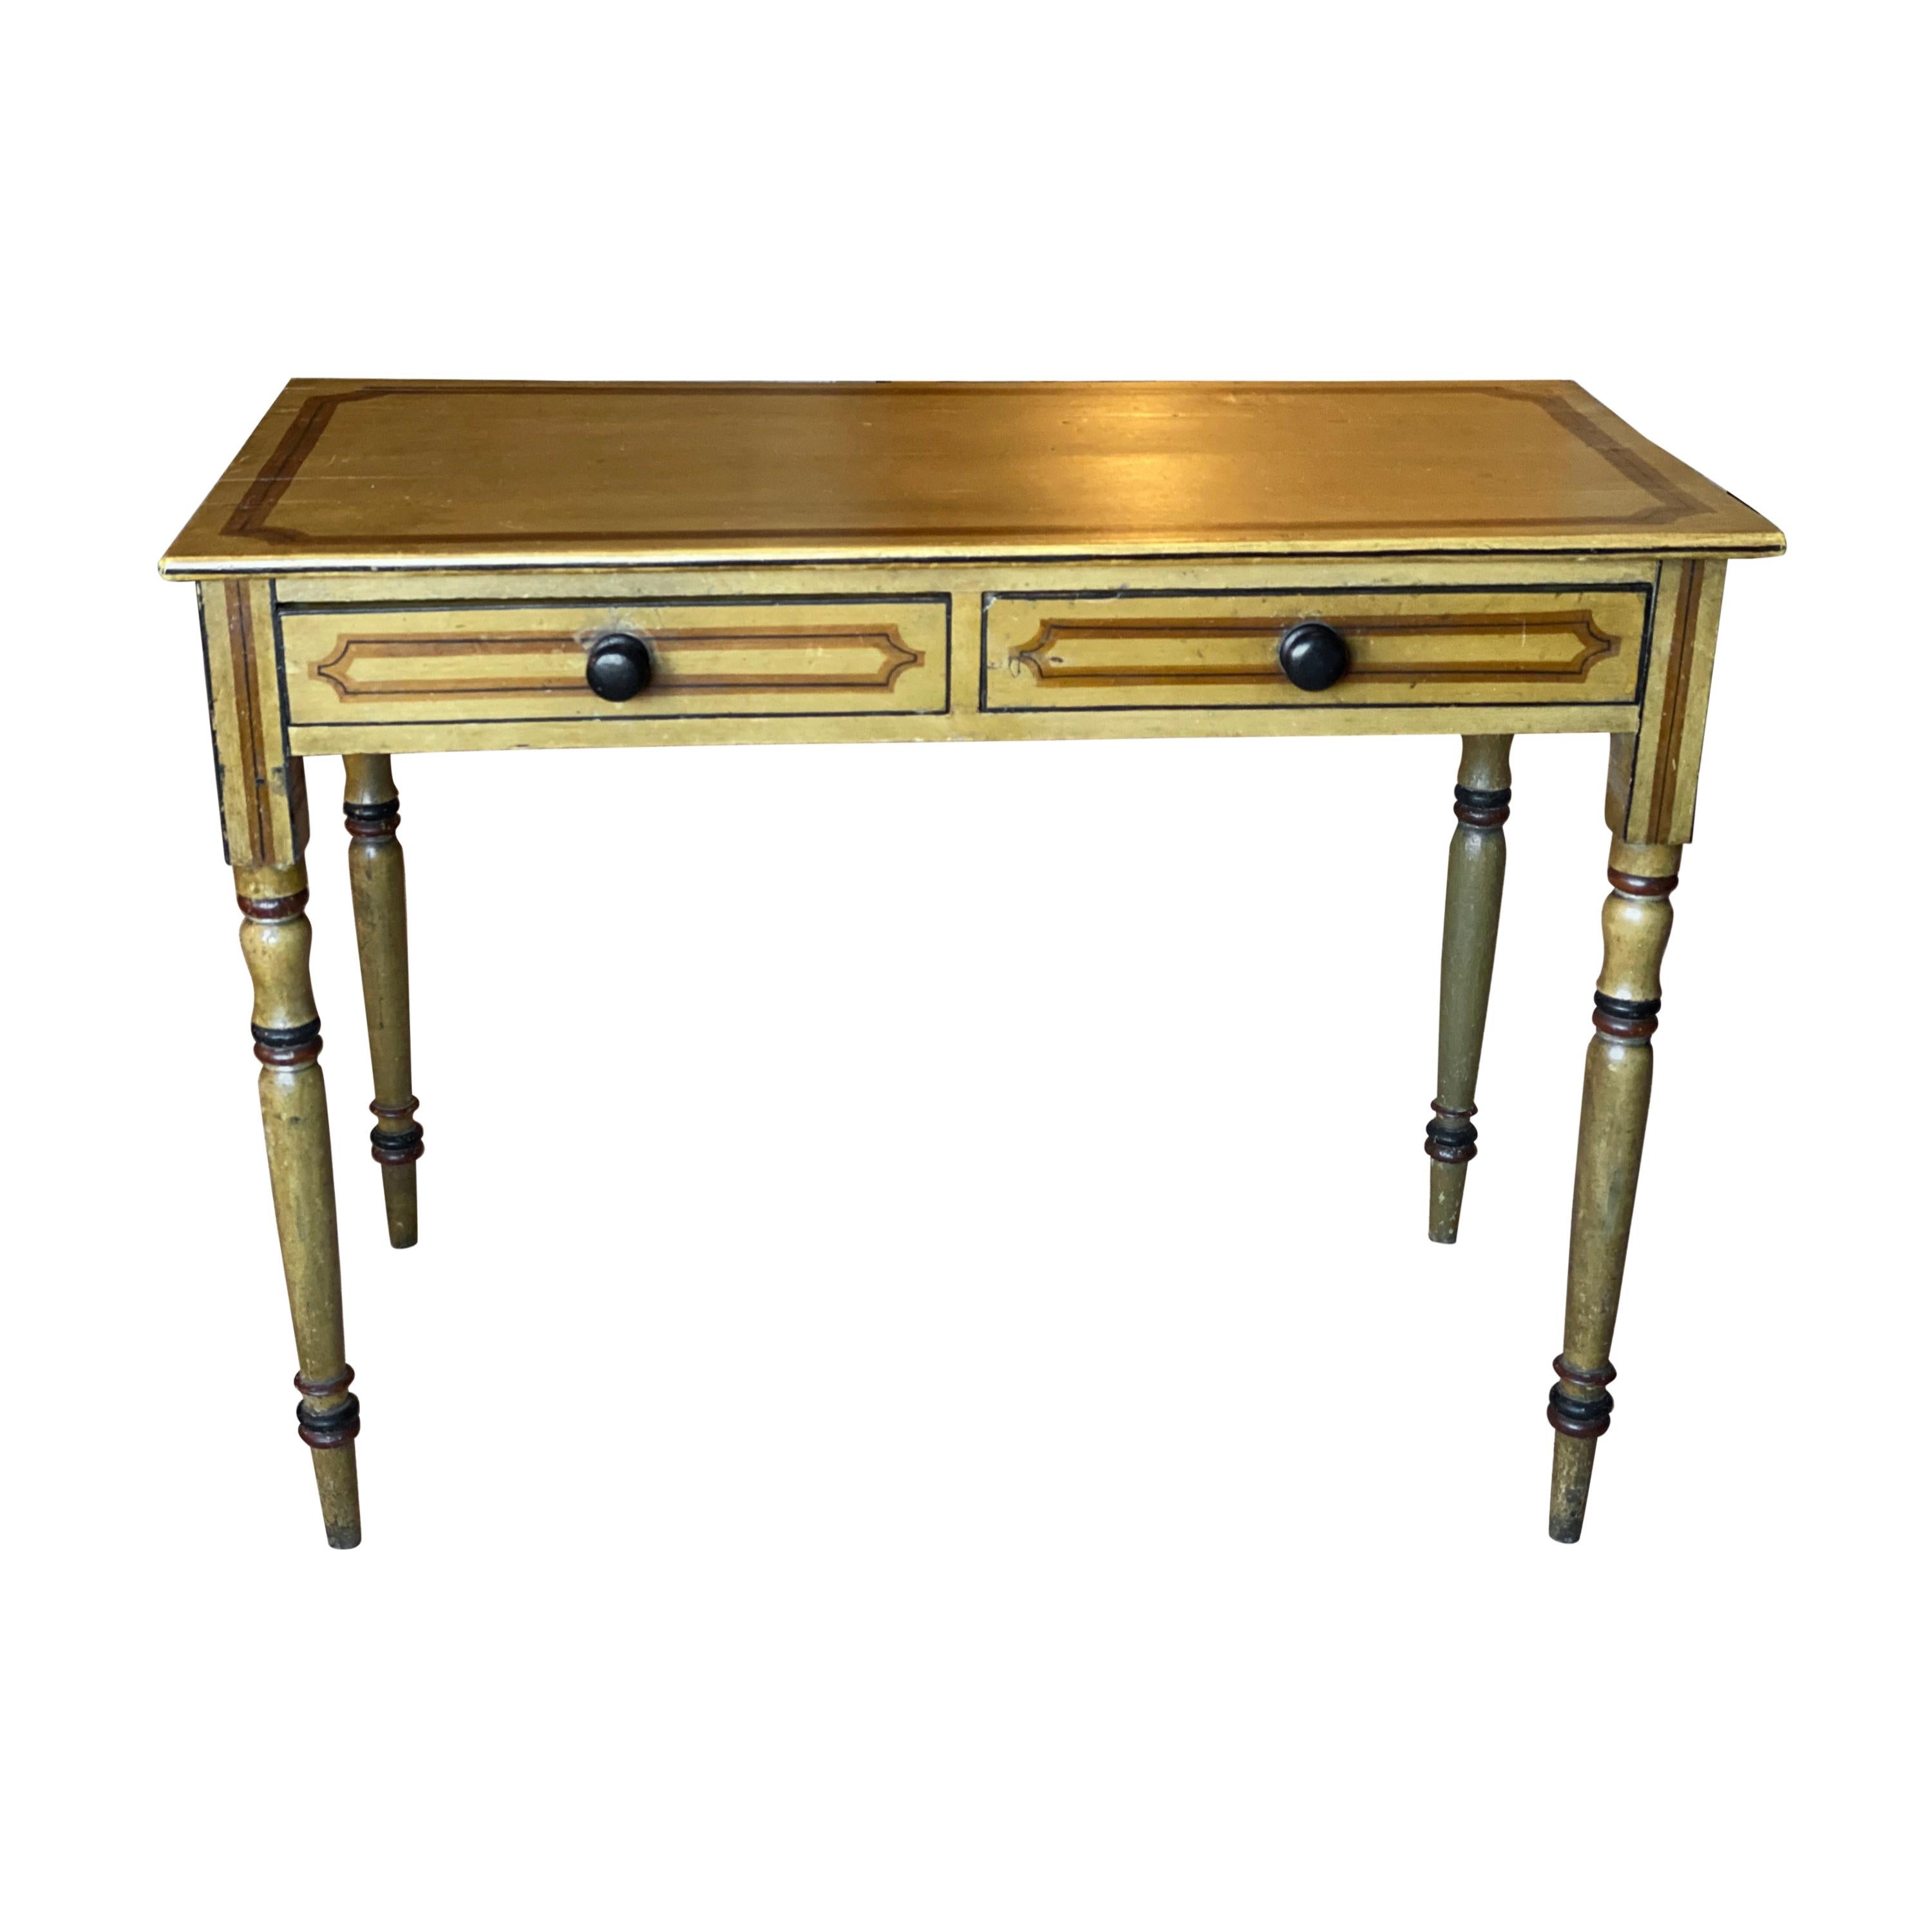 American Painted Table with Two Drawers, Late 19th Century